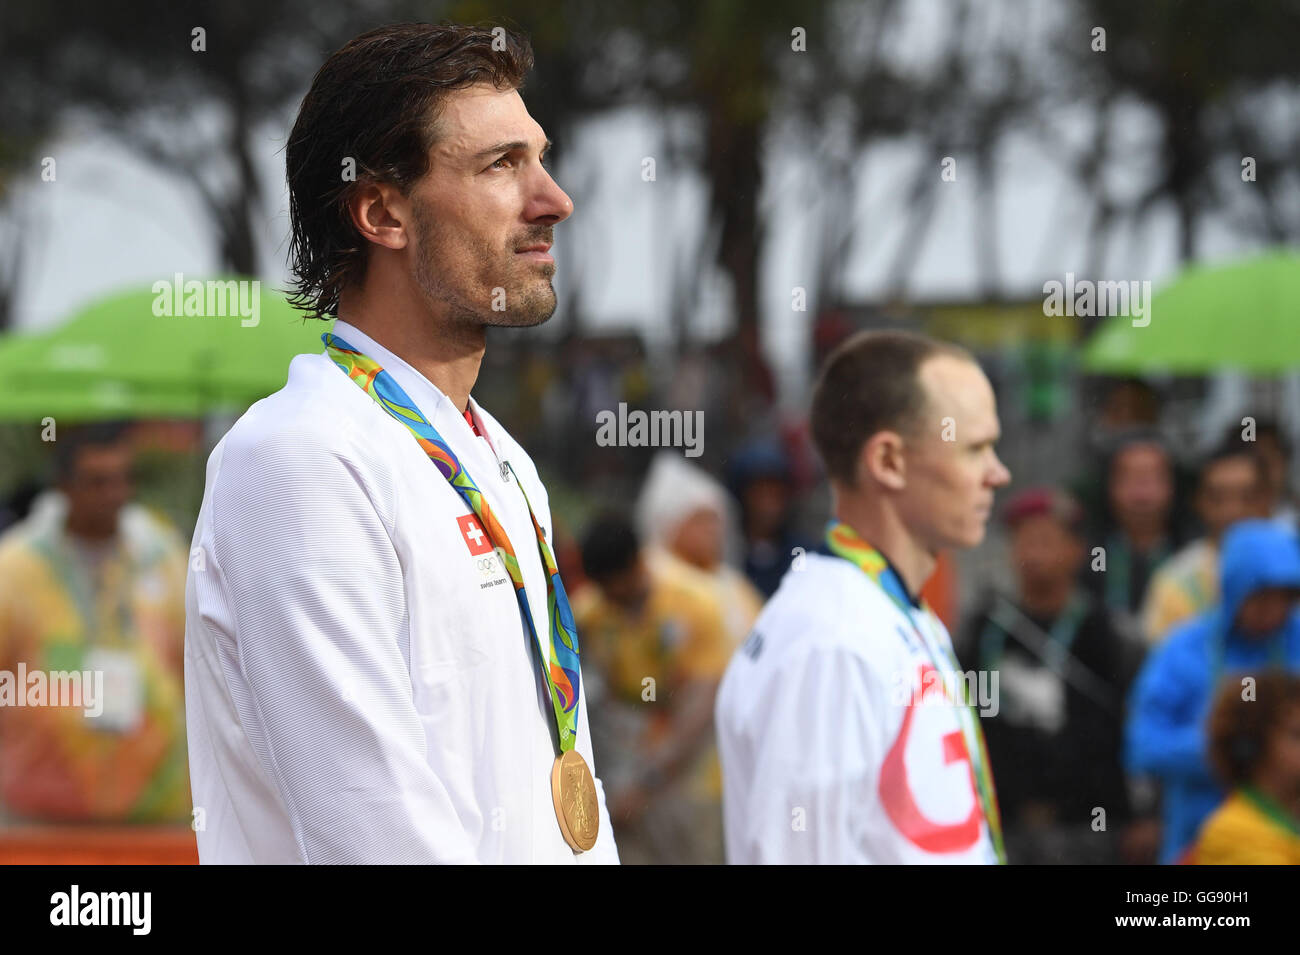 Rio de Janeiro, Brazil. 10th Aug, 2016. Fabian Cancellara (L) of Switzerland stands on the podium with the gold medal after winning the men's Individual Time Trial of the Rio 2016 Olympic Games Road Cycling events at Pontal in Rio de Janeiro, Brazil, 10 August 2016. At right Christopher Froome of Great Britain. Photo: Sebastian Kahnert/dpa/Alamy Live News Stock Photo